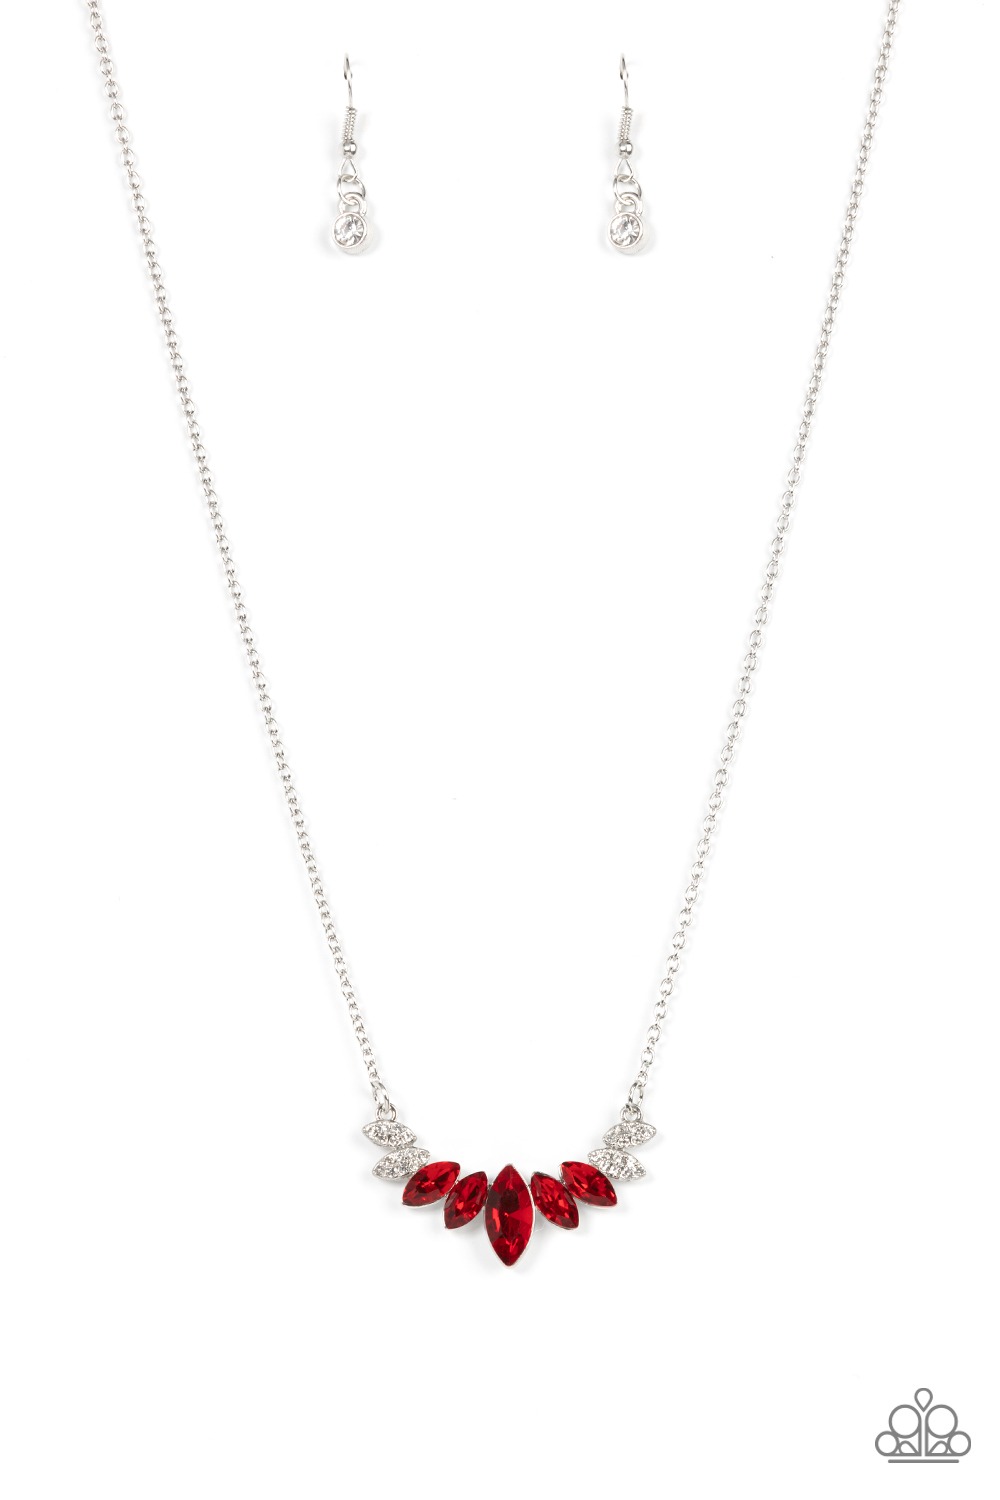 Necklace - One Empire at a Time - Red